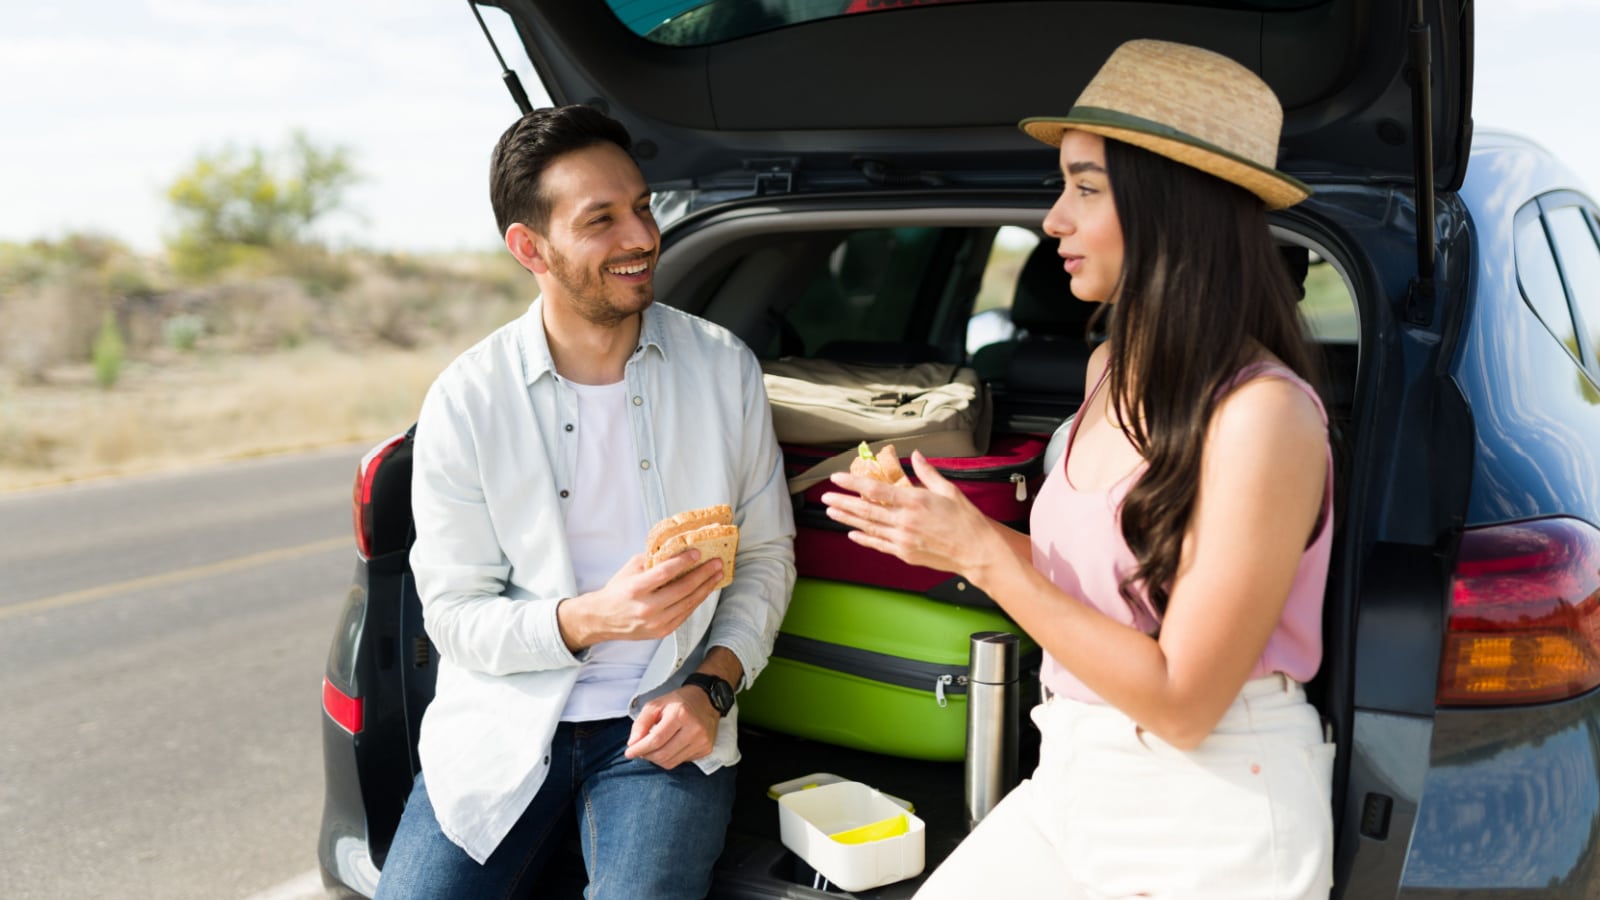 Attractive young man and woman eating a sandwich while resting on the car trunk during a weekend trip together